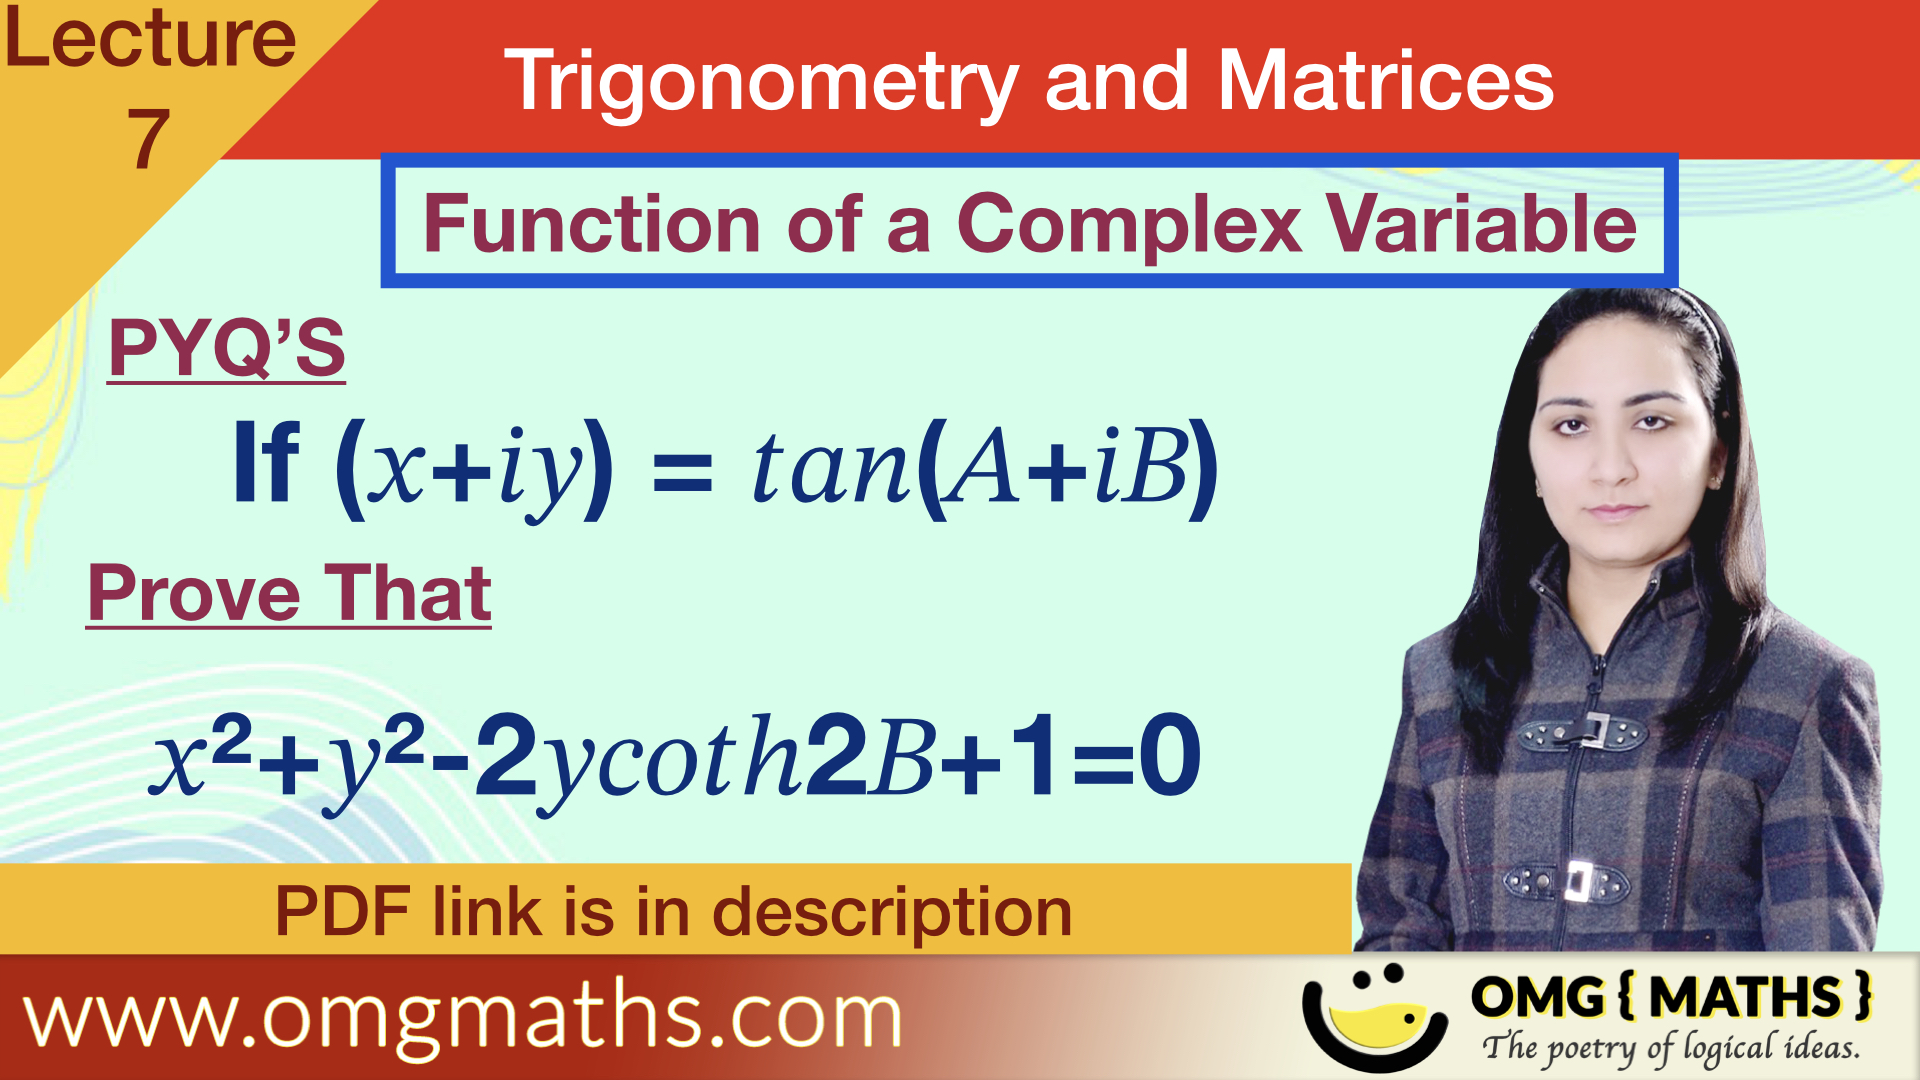 x+iy = tan(A+iB)| Function of a complex variable | pyq | Bsc | Trigonometry and Matrices